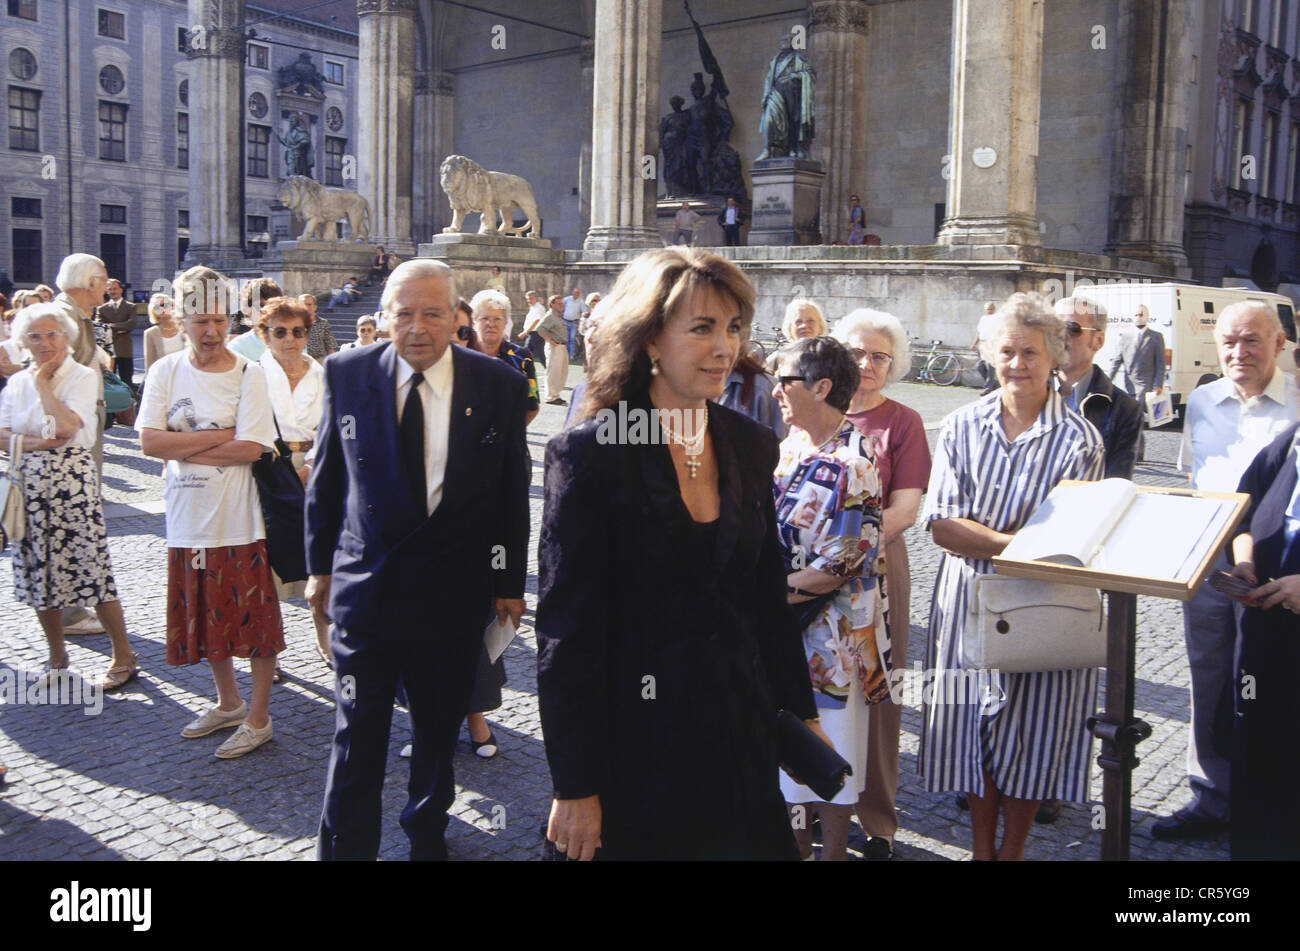 Schuermann, Petra, 15.9.1935 - 13.1.2010, German actress, TV presenter, half length, in front of the Feldherrnhalle, Munich, on occasion of the funeral of Else Moshammer, mother of the fashion designer Rudolph Moshammer, 16.8.1993, Stock Photo